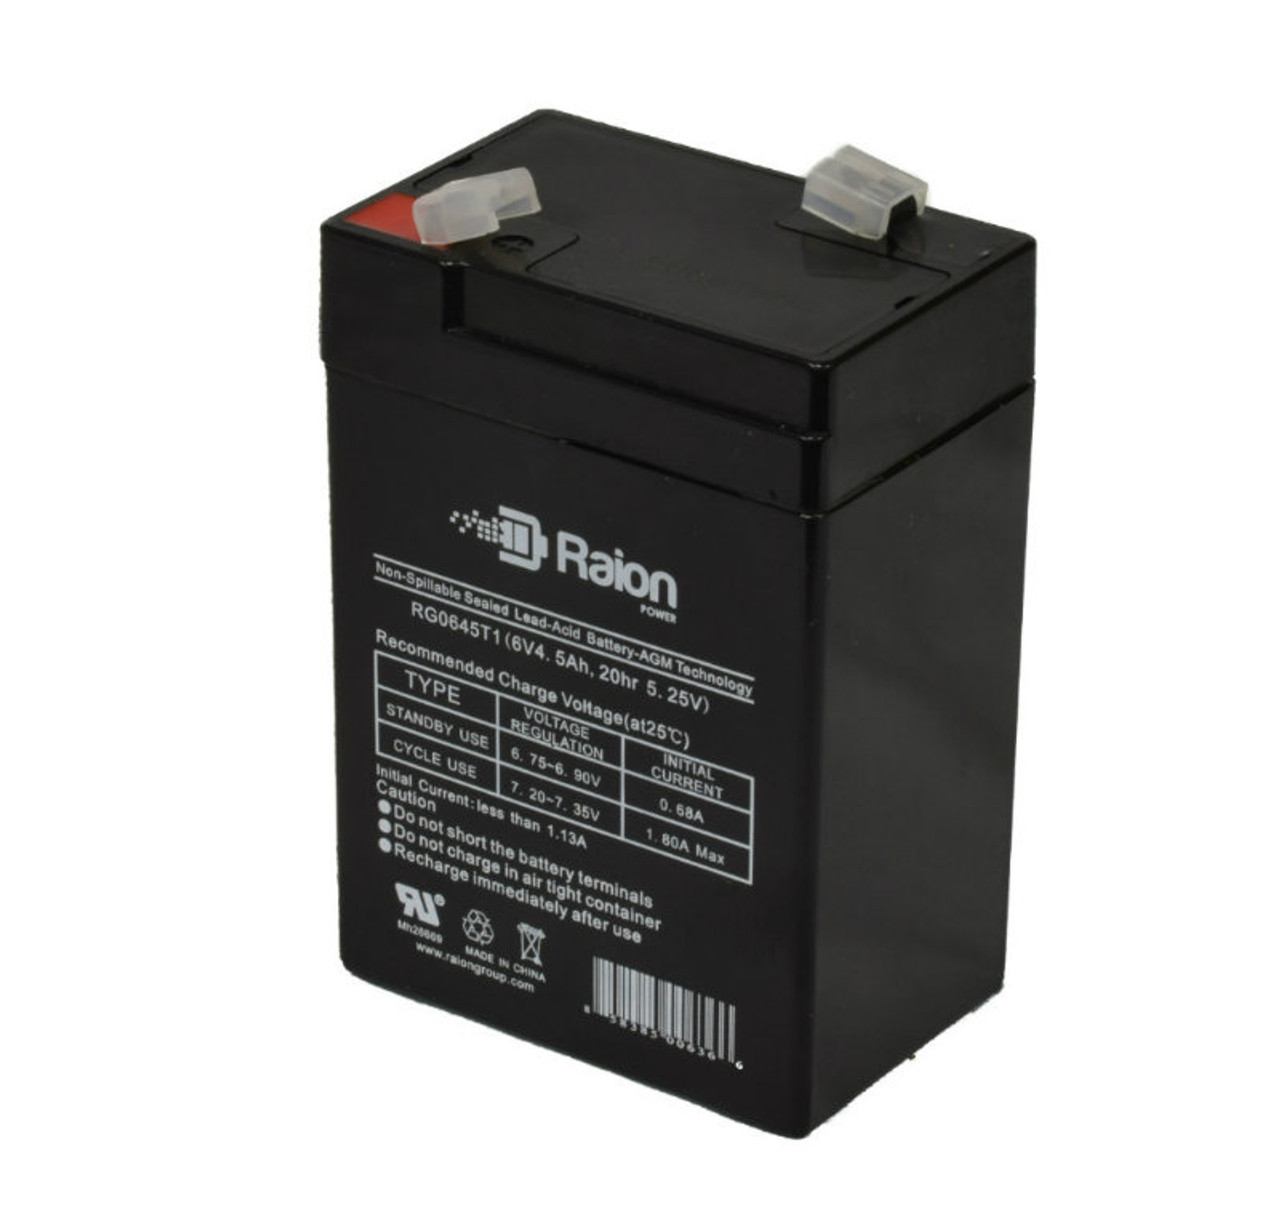 Raion Power RG0645T1 6V 4.5Ah Replacement Battery Cartridge for Genesis NP4.5-6